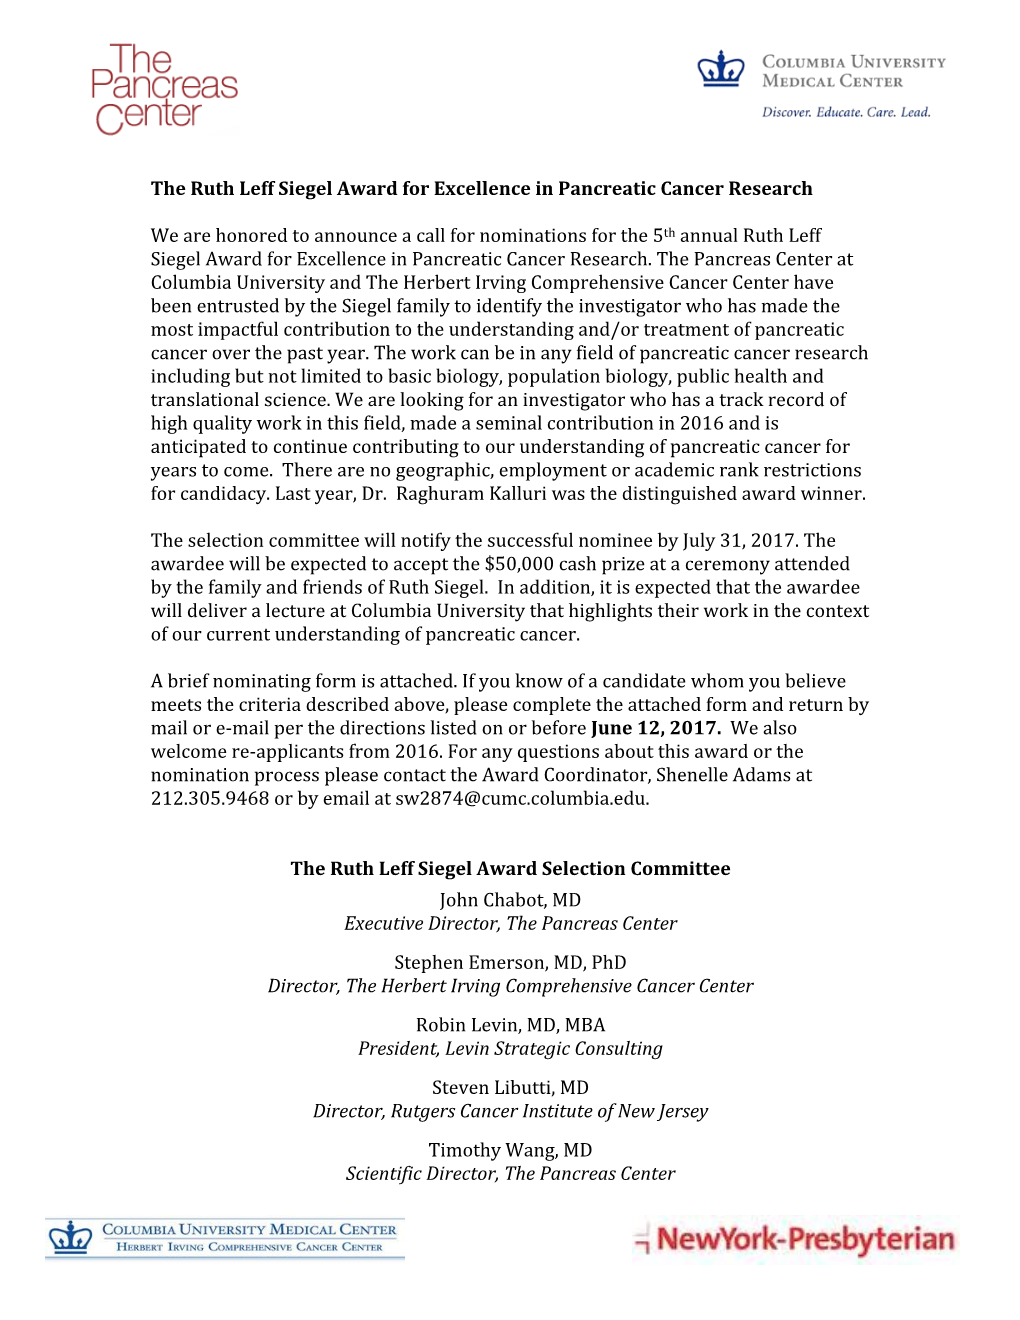 The Ruth Leff Siegel Award for Excellence in Pancreatic Cancer Research We Are Honored to Announce a Call for Nominations for Th